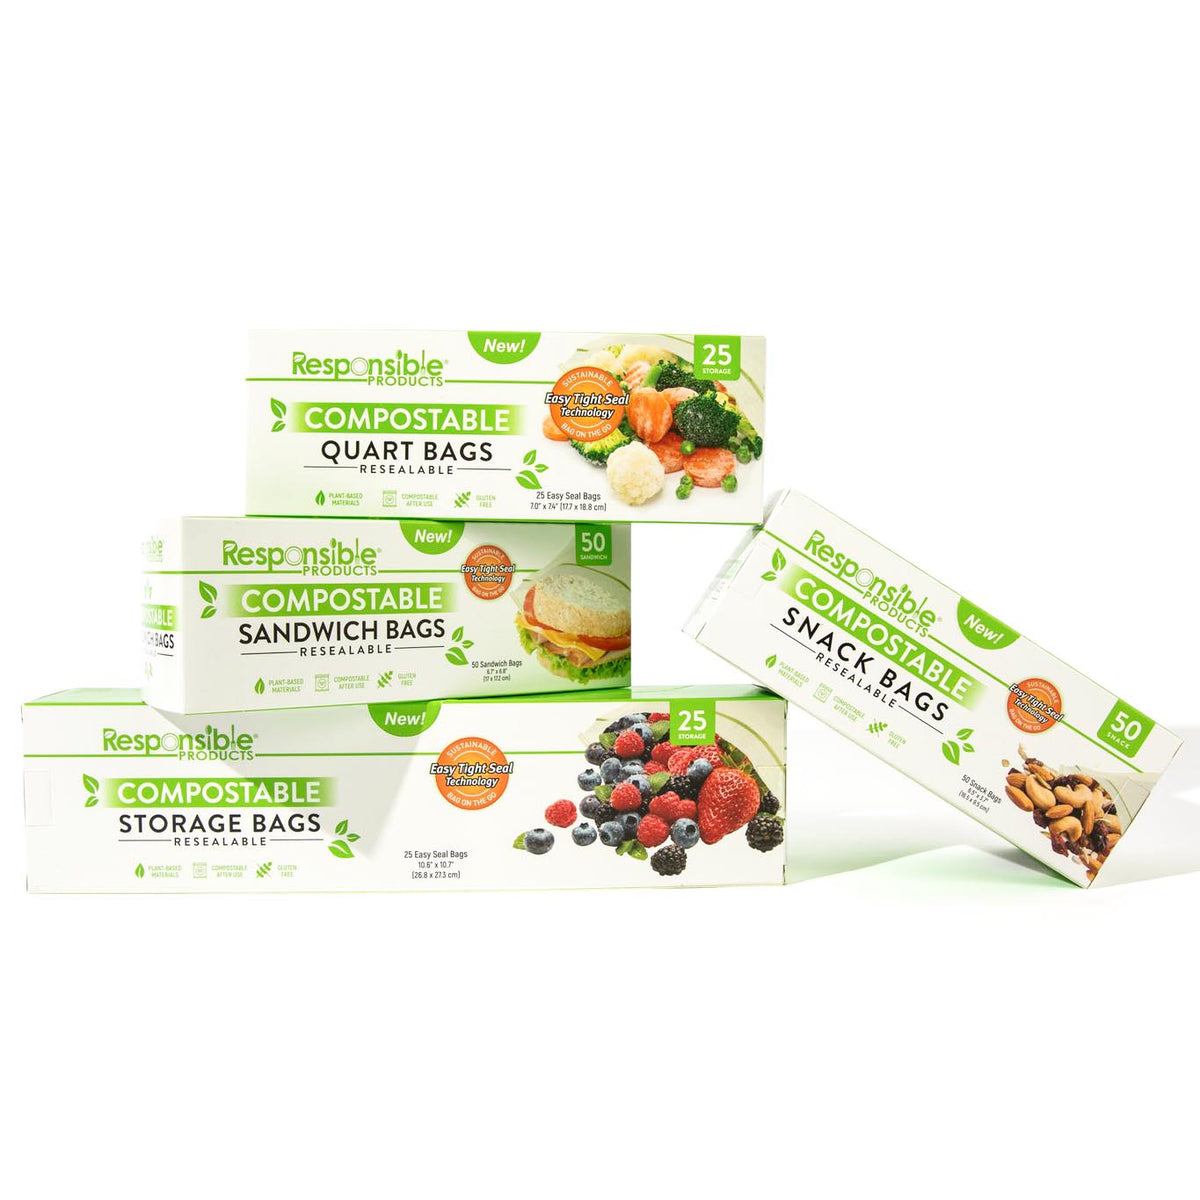 Starter Certified Compostable Resealable Food Bag Value Bundle Pack (One of Every Size!)